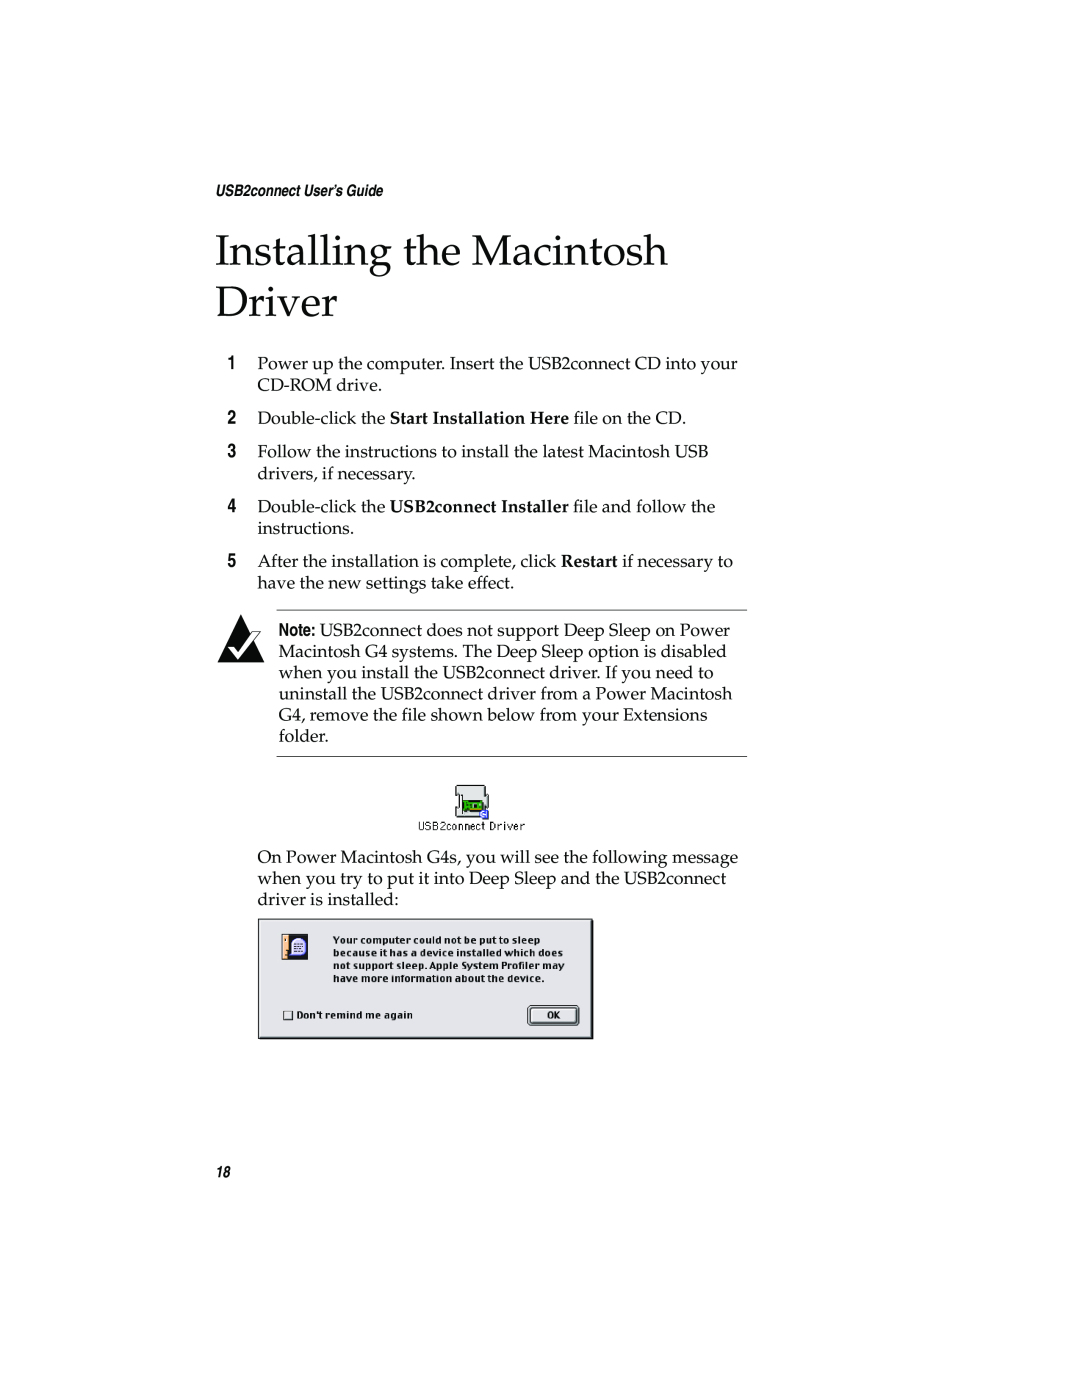 Adaptec USB2connect Host Bus Adapter manual Installing the Macintosh Driver 